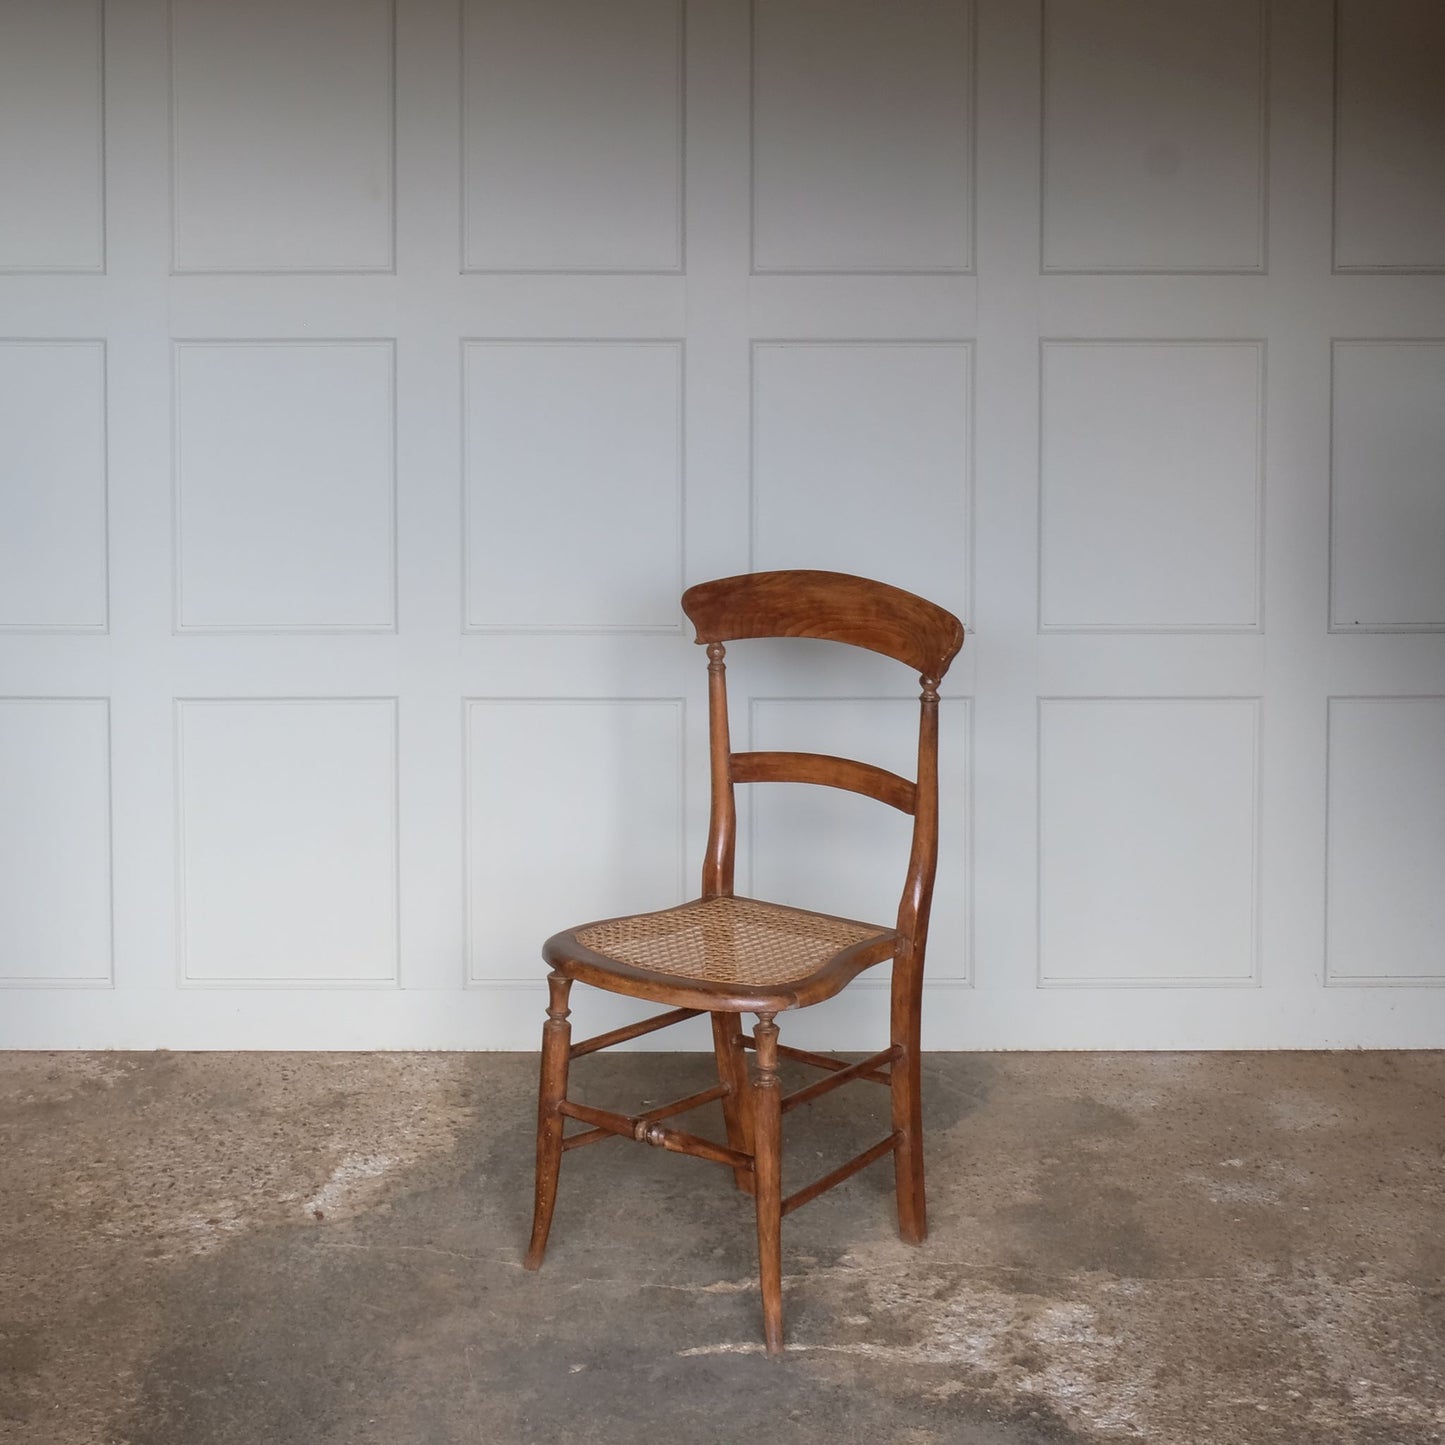 An Edwardian cane seated elm chair, a particularly elegant and charming design. A lovely gentle patina throughout, in very good, sturdy condition.